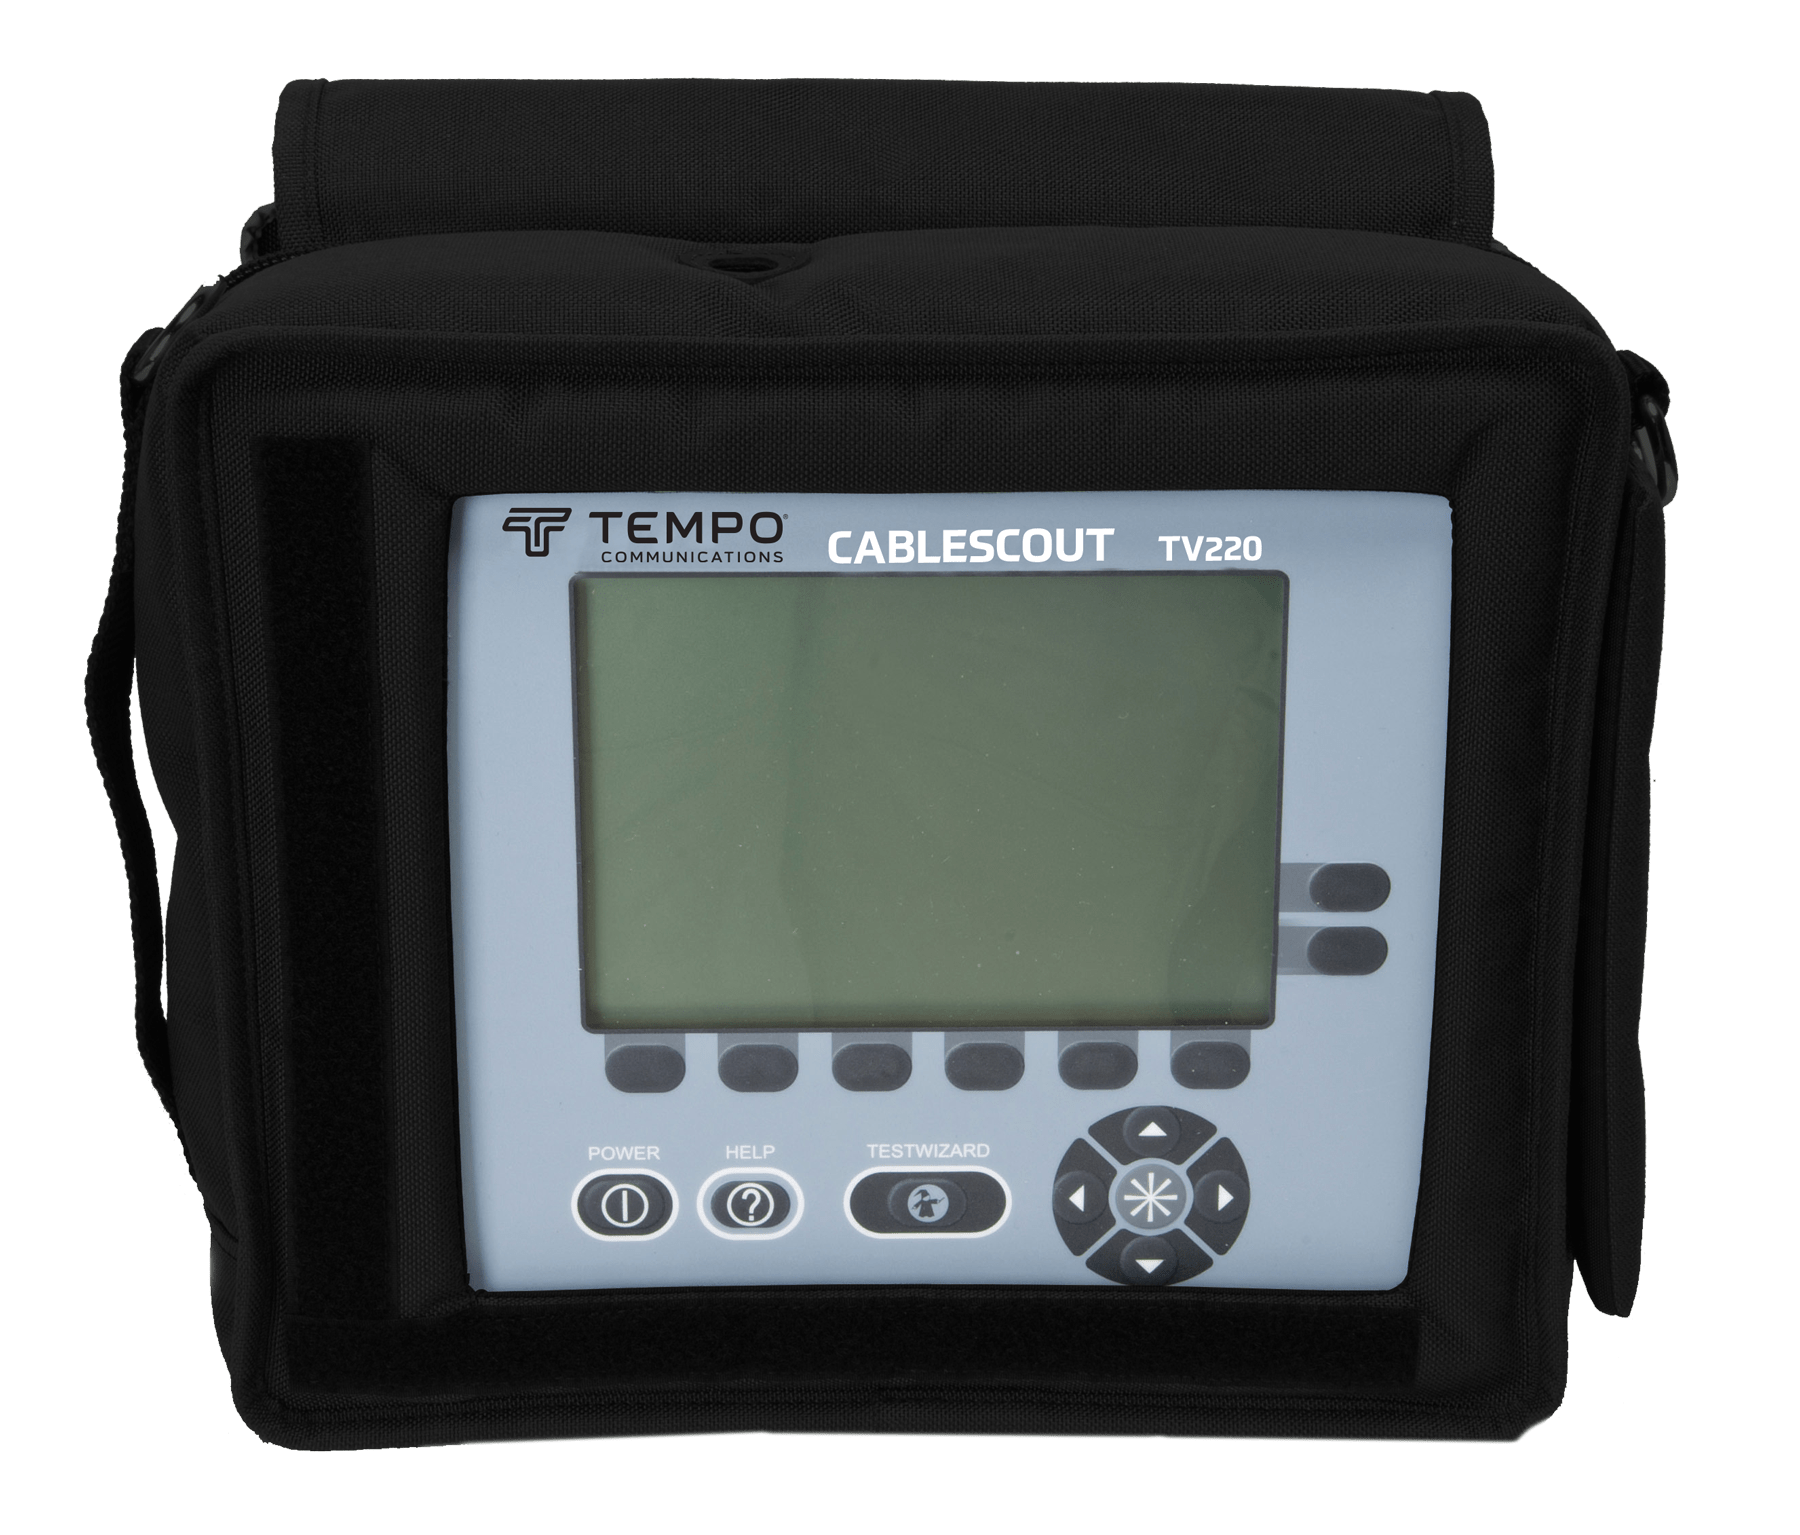 Triplett TDR100 Cable Length Tester and Time Domain Reflectometer